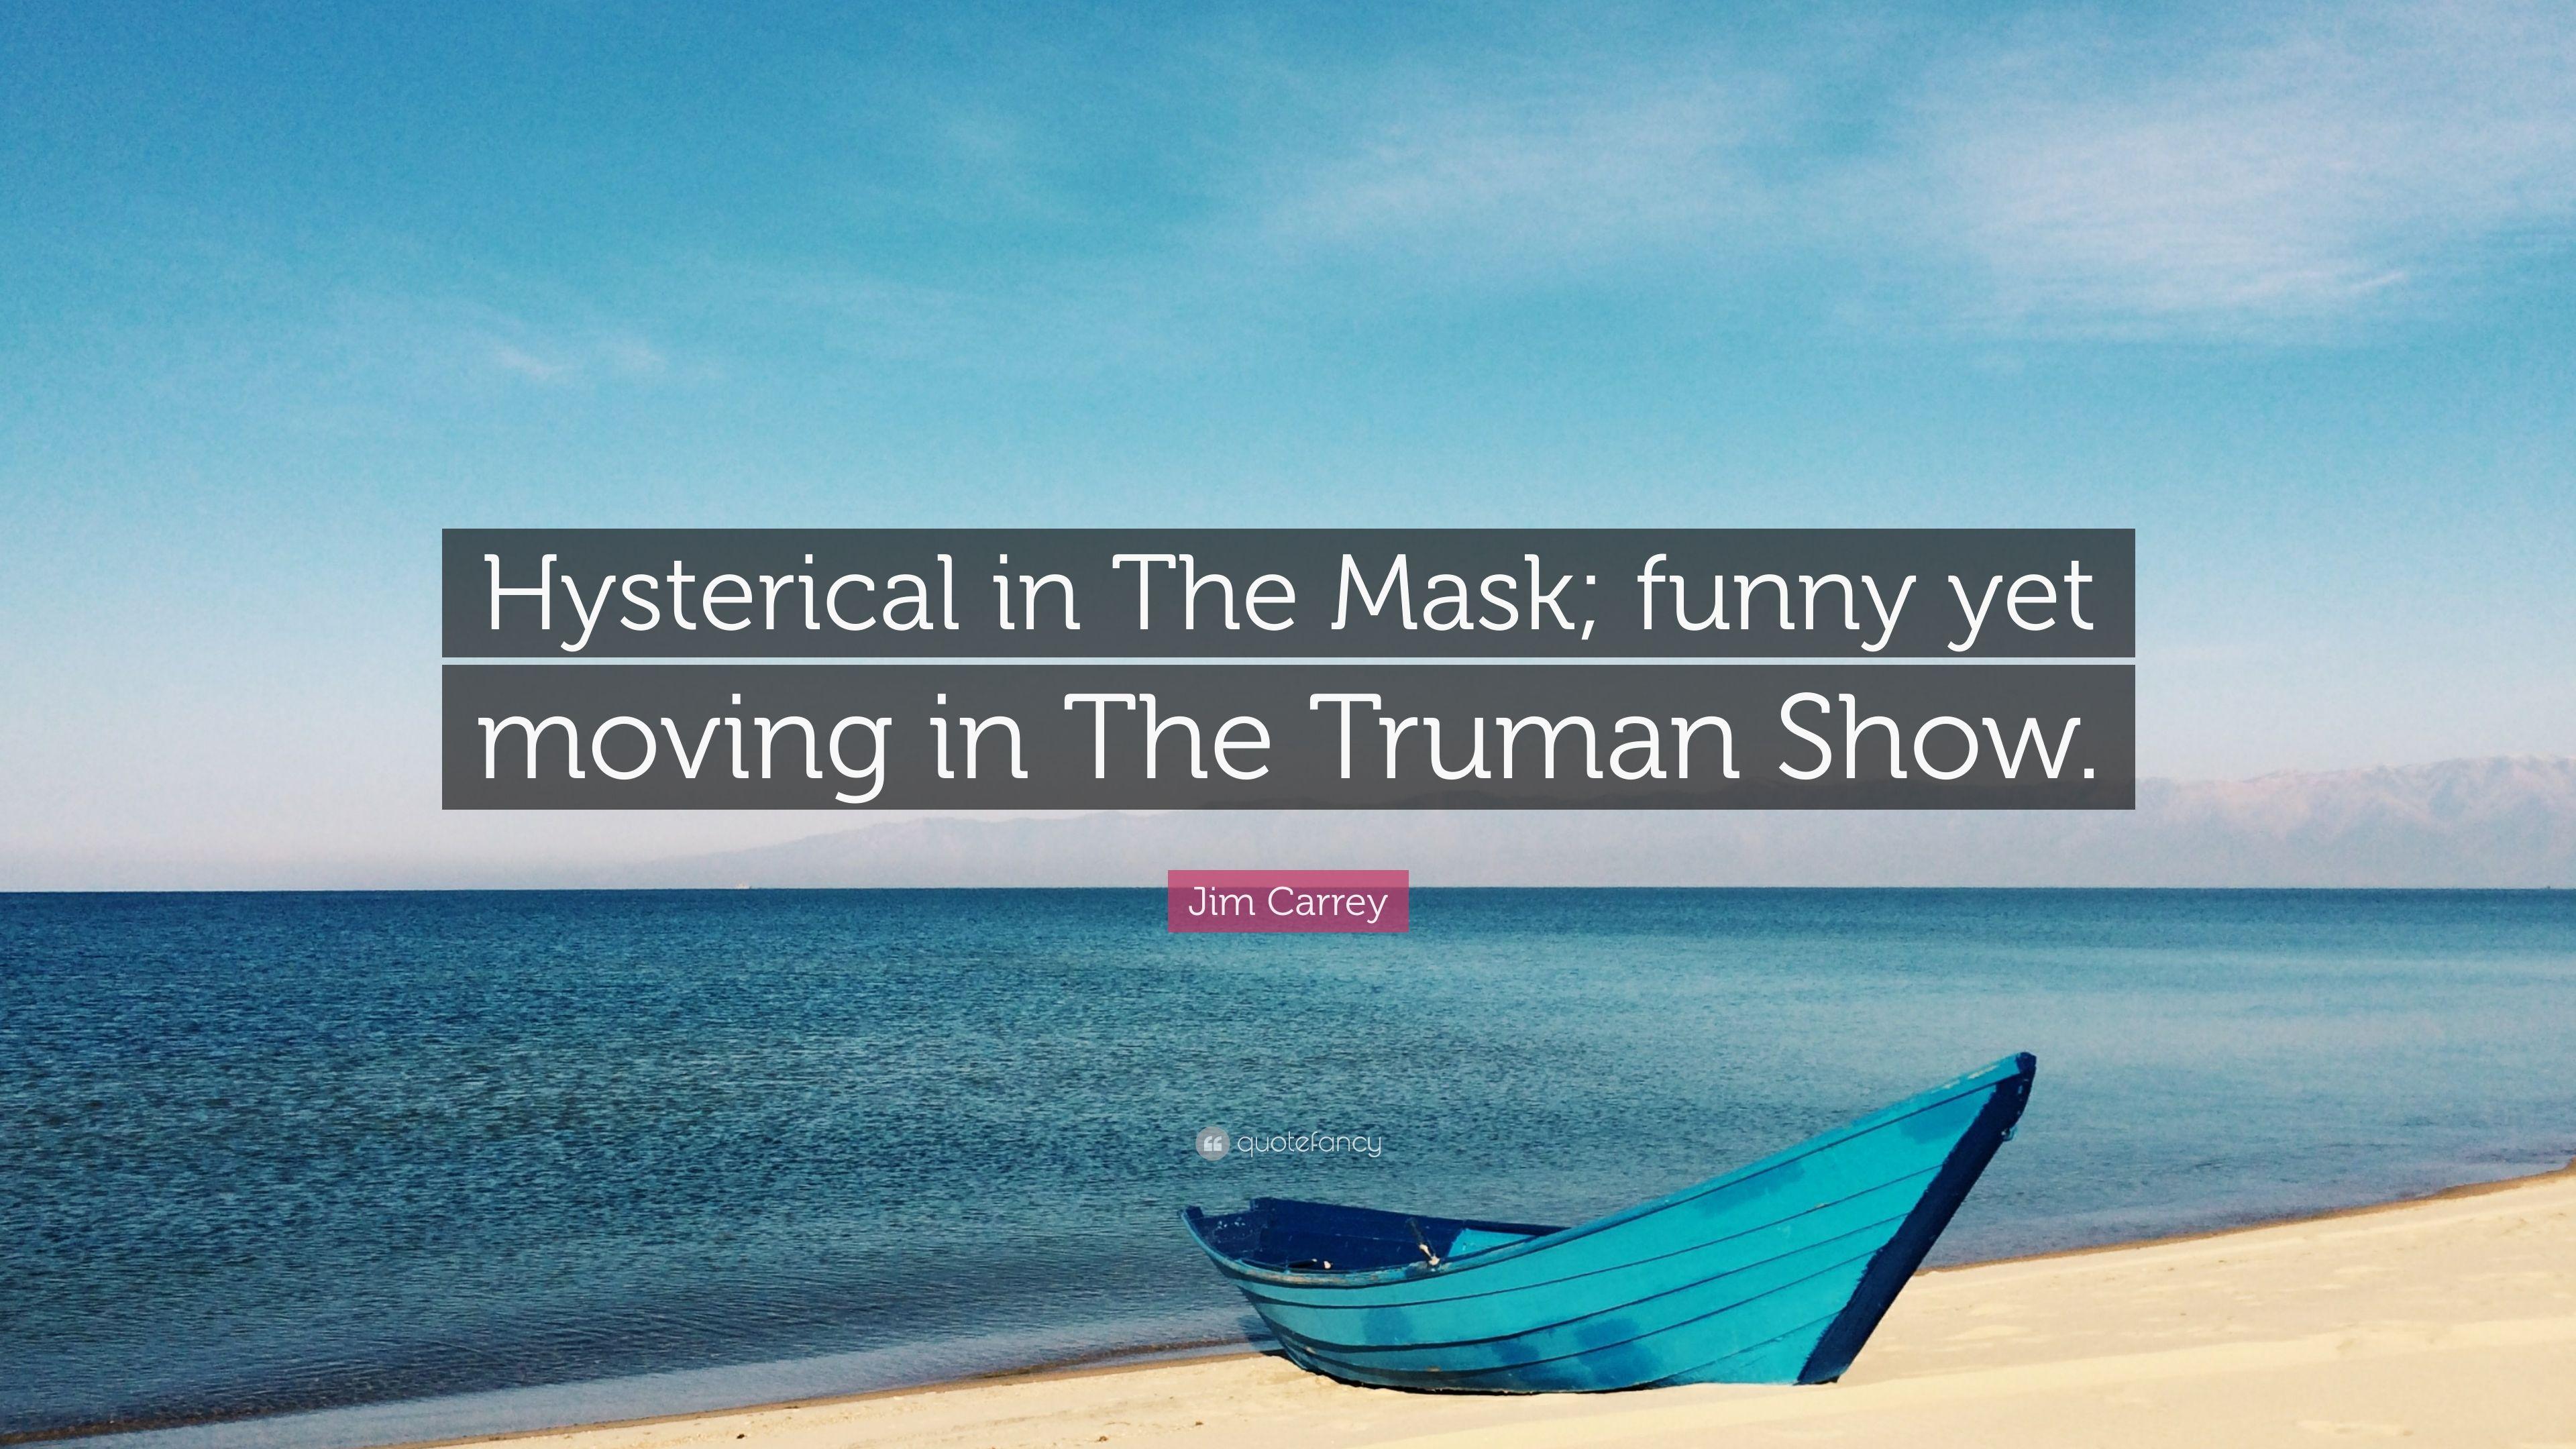 Jim Carrey Quote: “Hysterical in The Mask; funny yet moving in